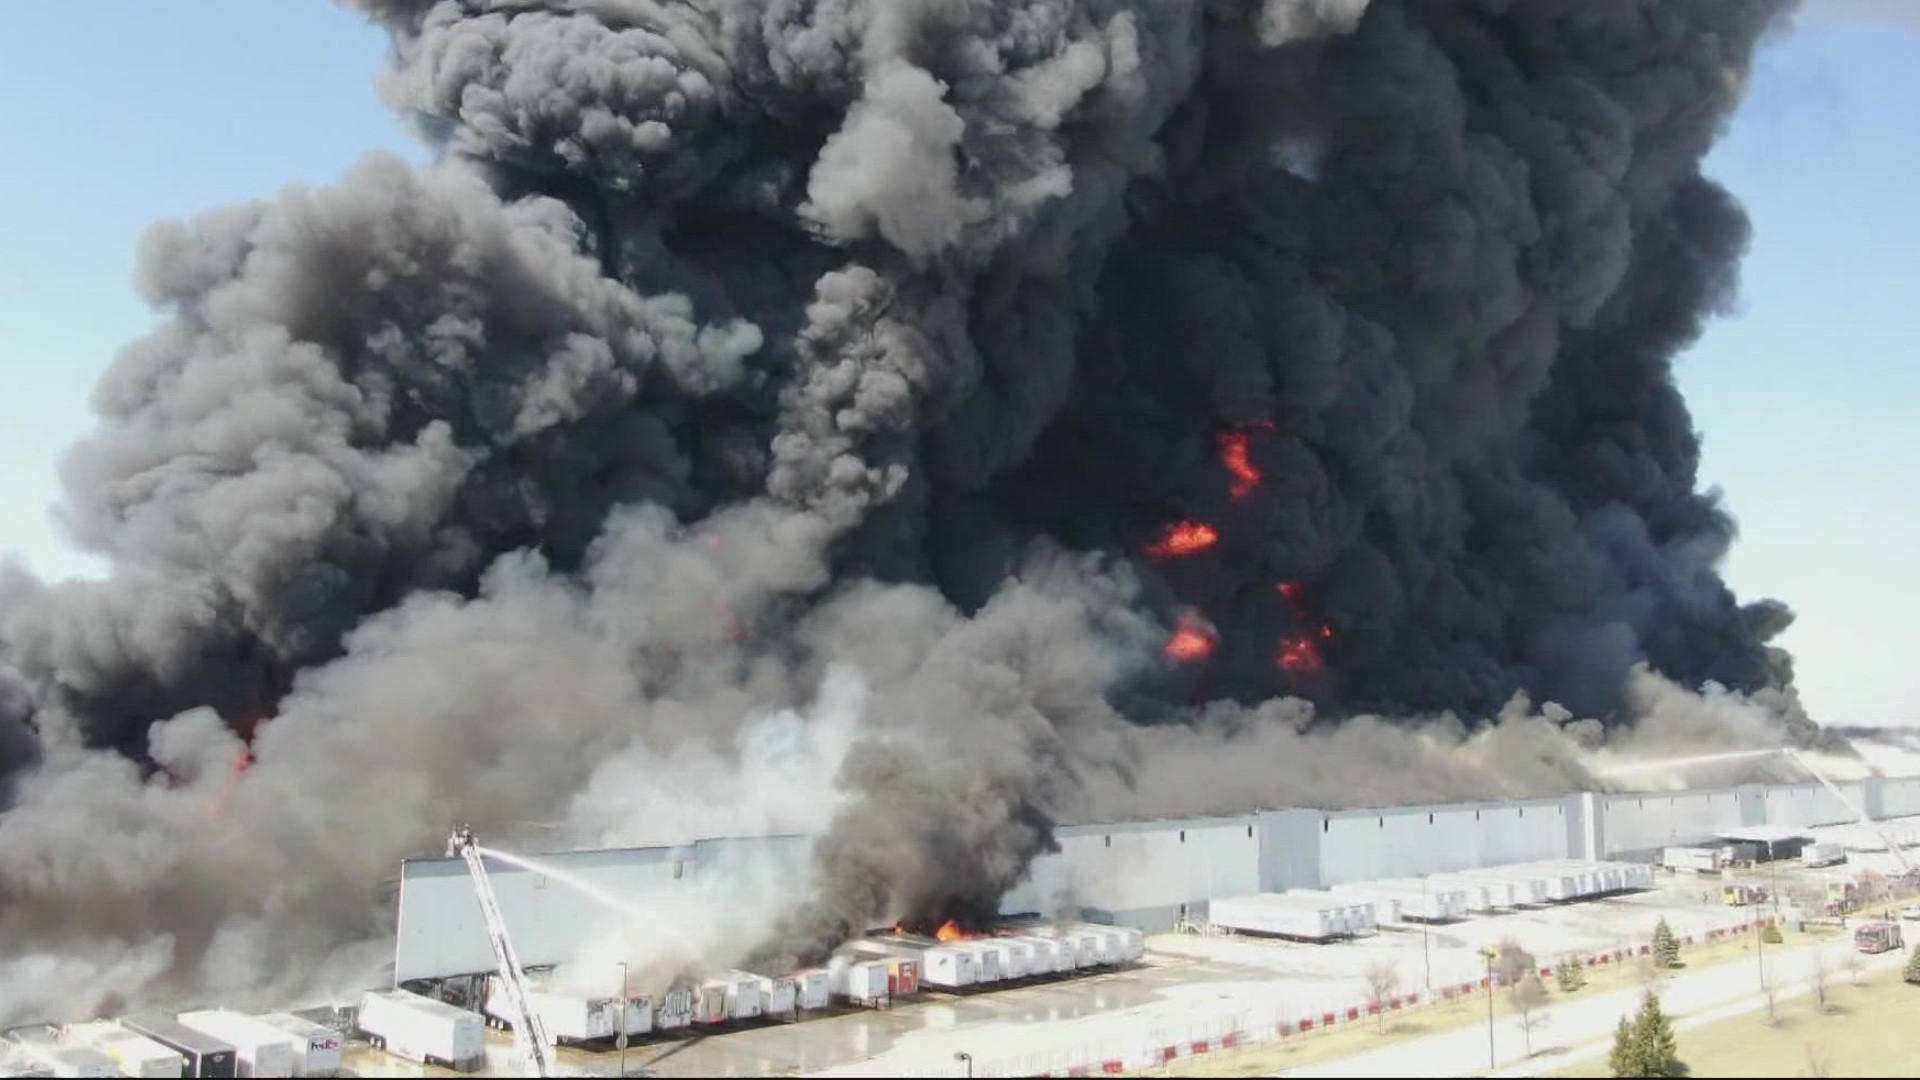 Investigators with the ATF were back on the scene Monday of a Walmart warehouse fire in Plainfield.